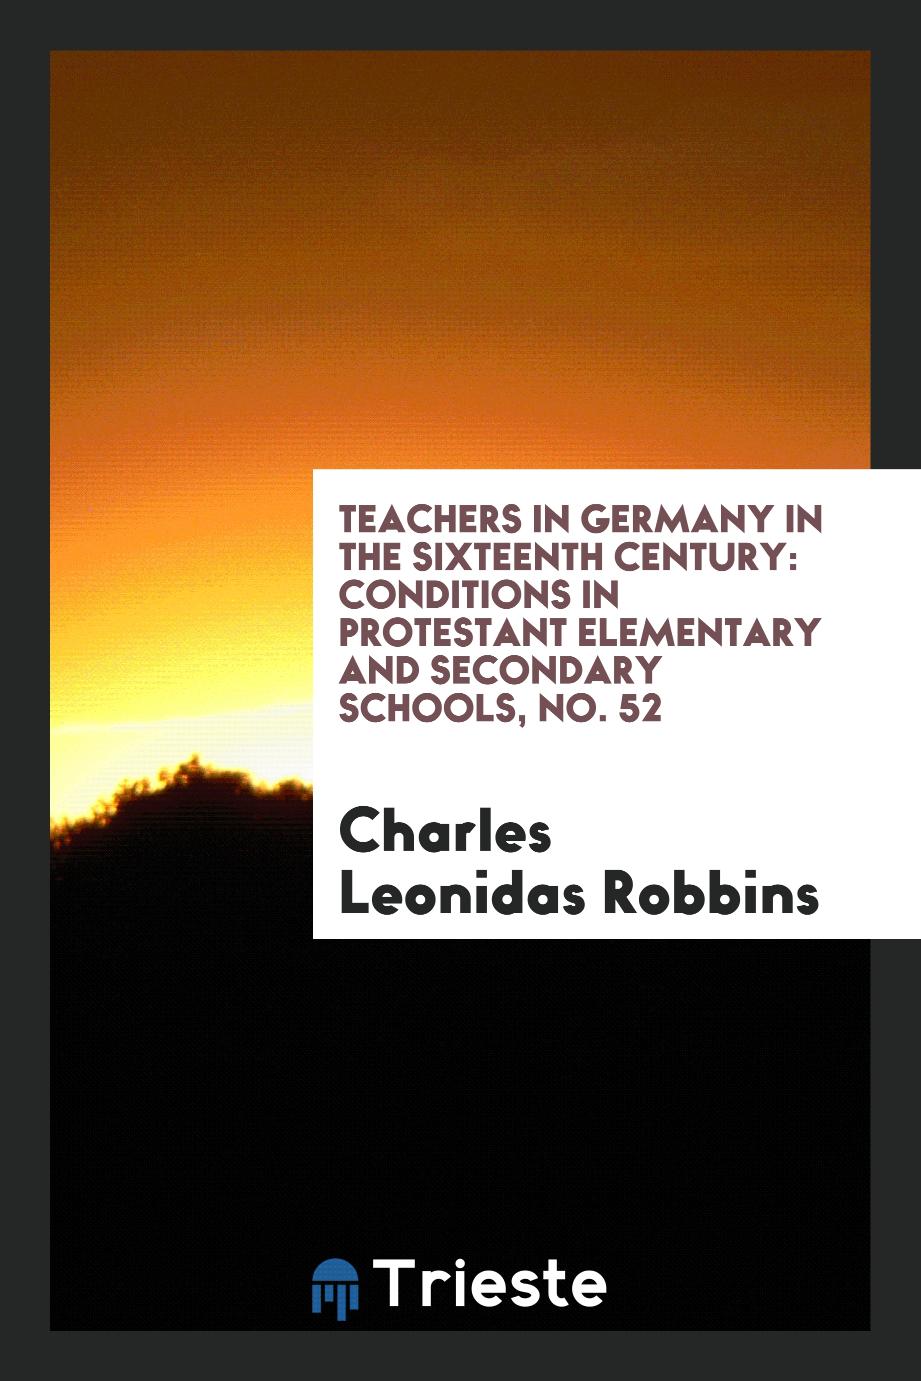 Teachers in Germany in the Sixteenth Century: Conditions in Protestant Elementary and Secondary Schools, No. 52